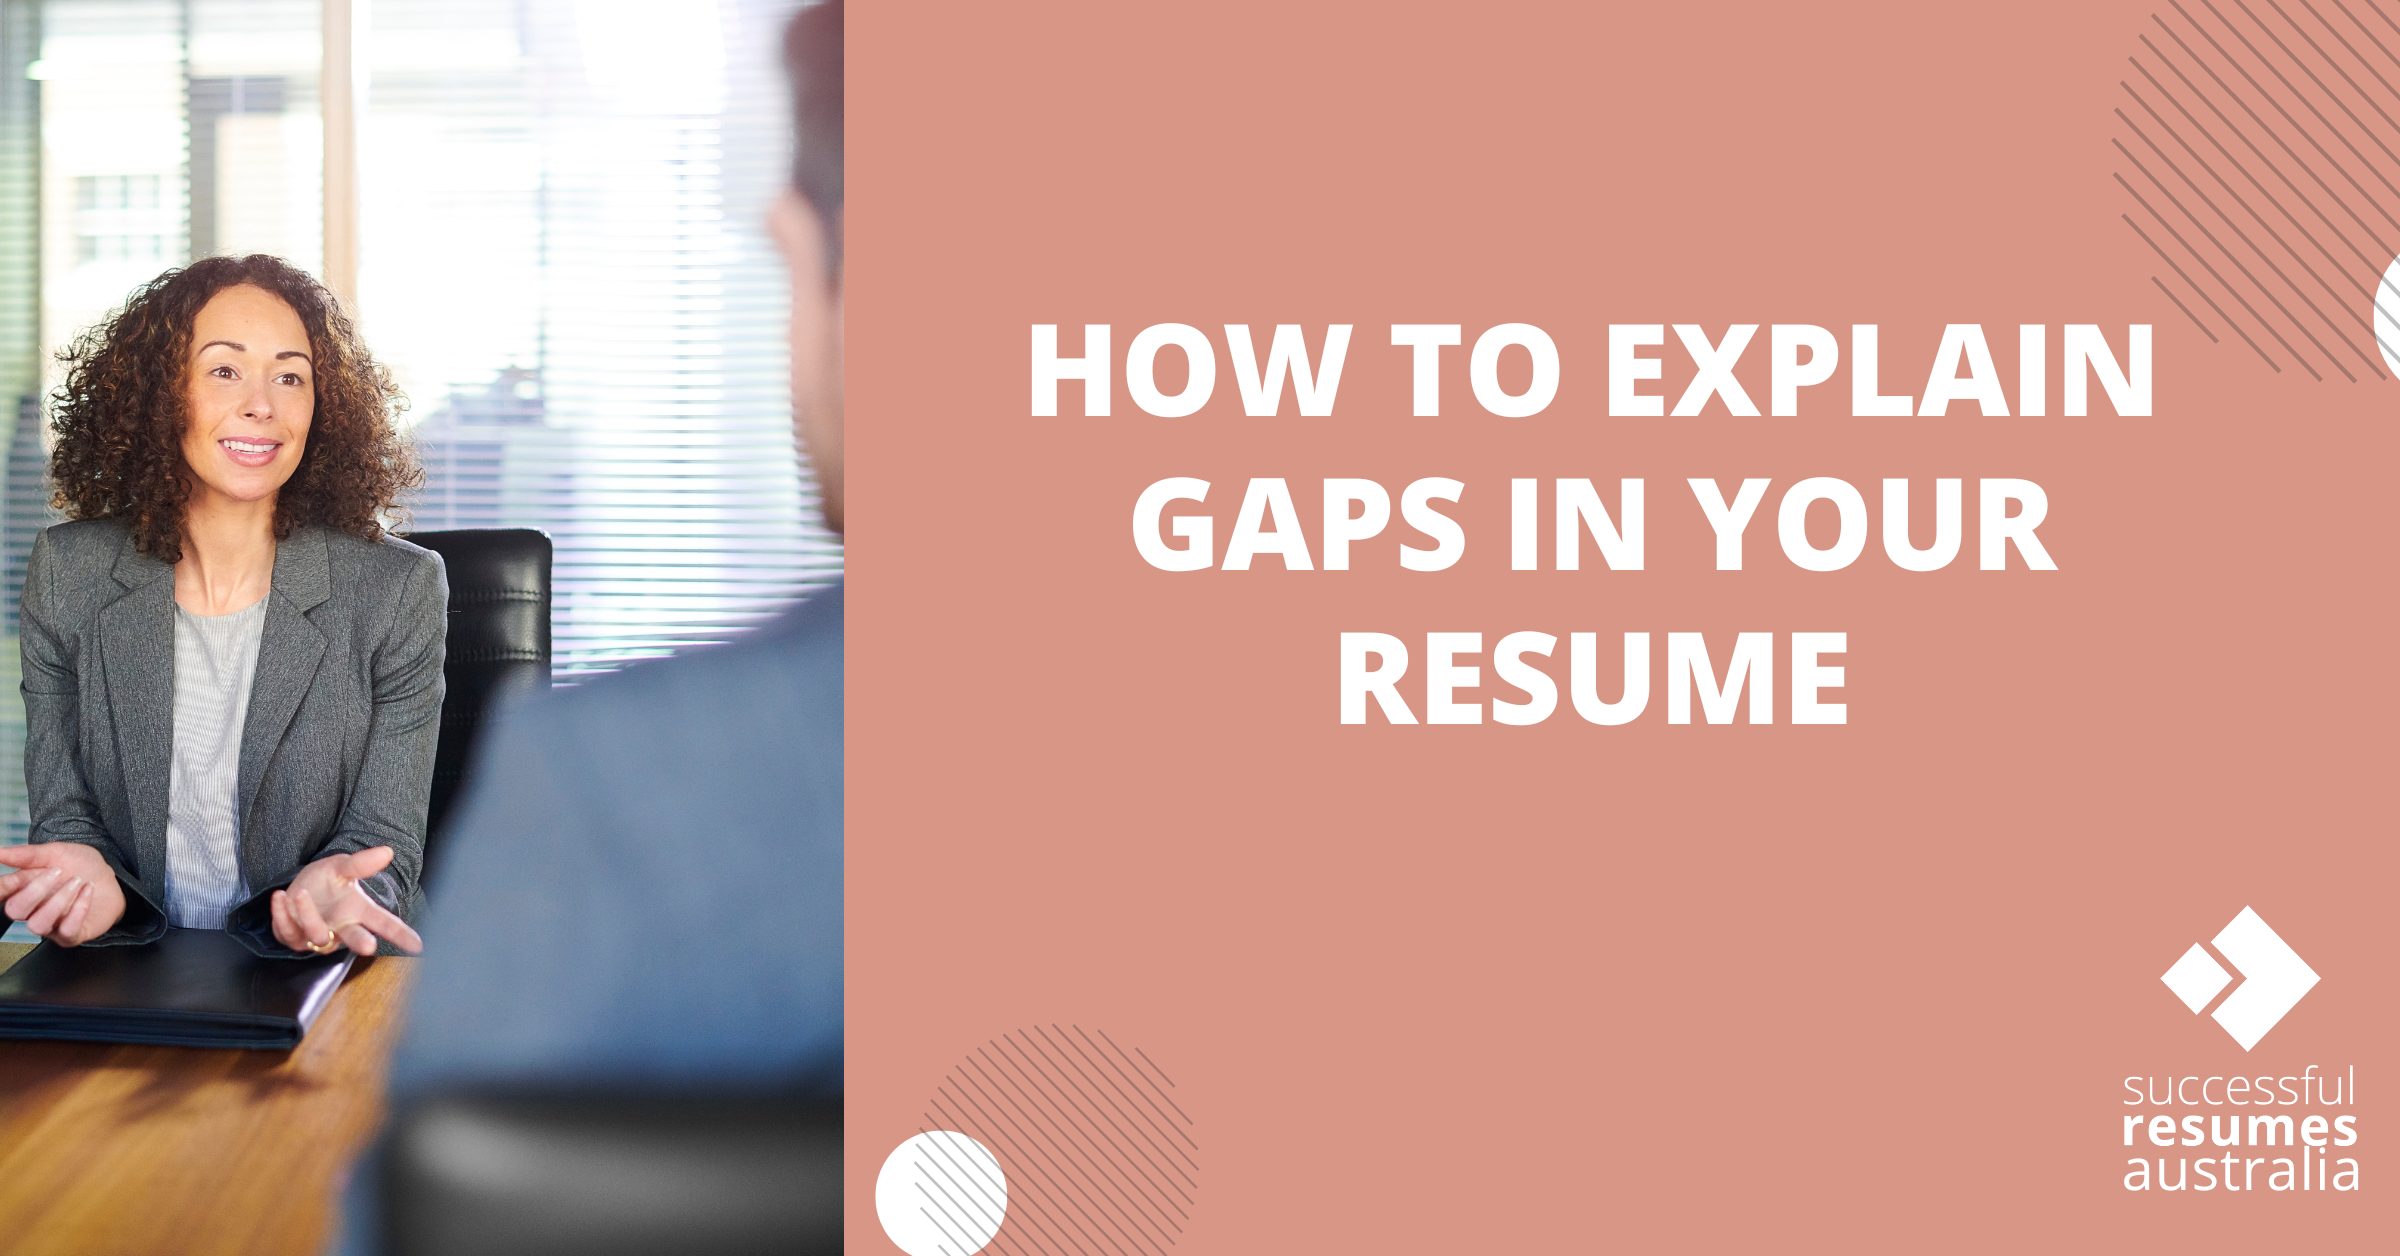 How to Explain Gaps in your Resume